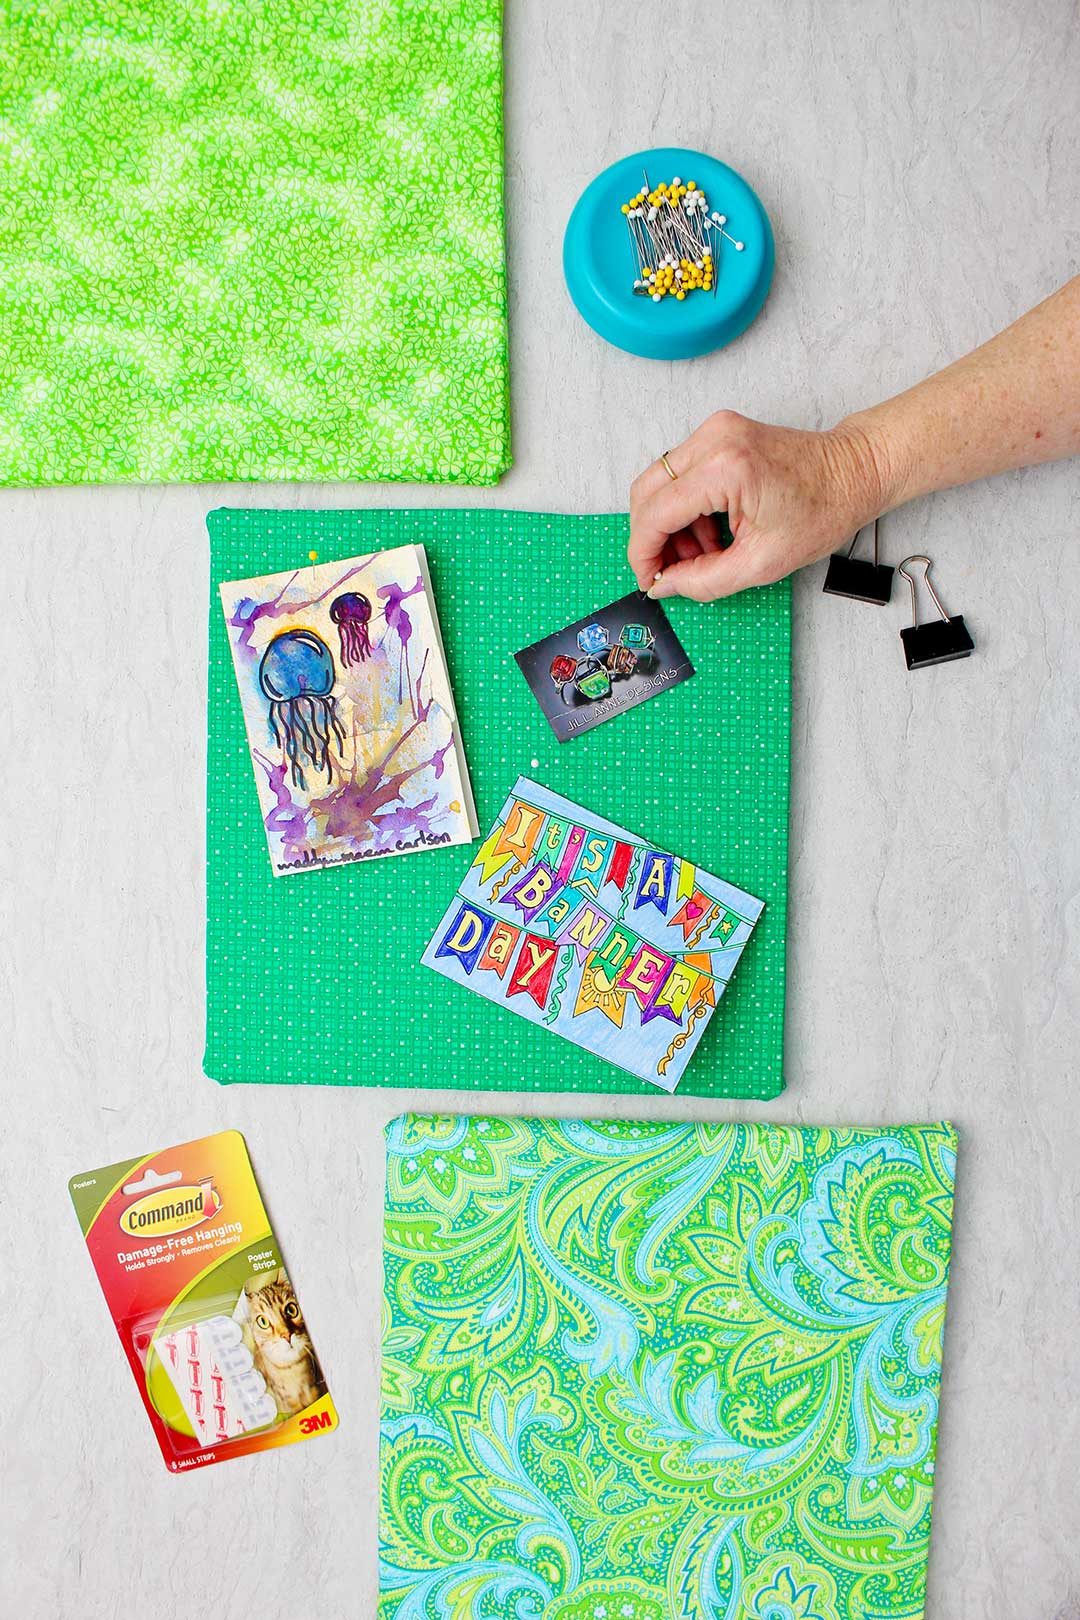 Hand pinning a photo to a foam core fabric bulletin board in a kelly green fabric with the other two completed boards near by.